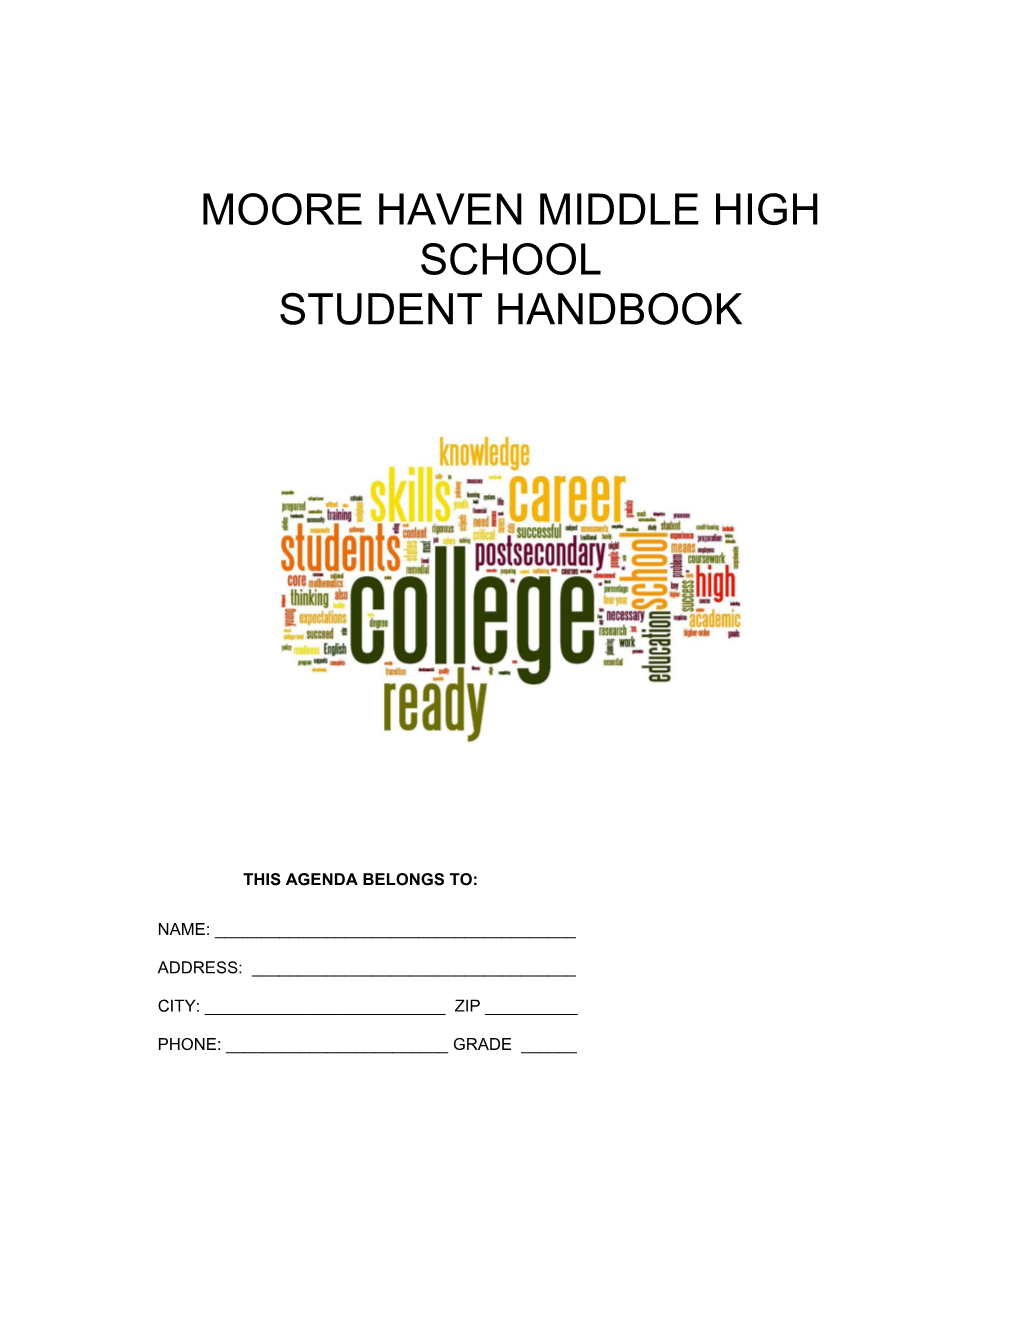 Moore Haven Middle High School